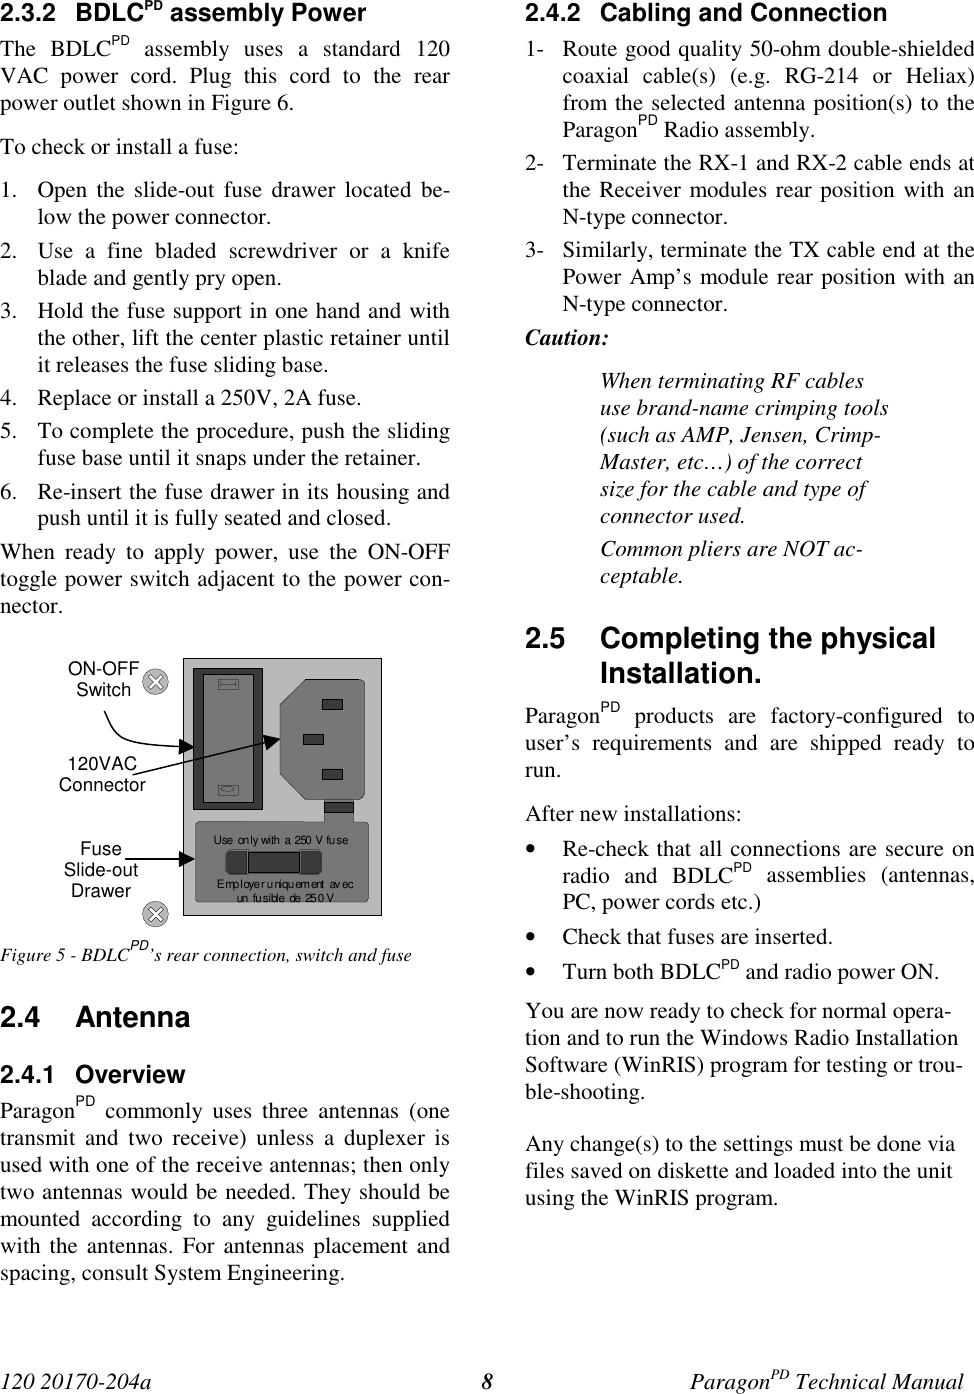 120 20170-204a ParagonPD Technical Manual82.3.2 BDLCPD assembly PowerThe BDLCPD assembly uses a standard 120VAC power cord. Plug this cord to the rearpower outlet shown in Figure 6.To check or install a fuse:1. Open the slide-out fuse drawer located be-low the power connector.2. Use a fine bladed screwdriver or a knifeblade and gently pry open.3. Hold the fuse support in one hand and withthe other, lift the center plastic retainer untilit releases the fuse sliding base.4. Replace or install a 250V, 2A fuse.5. To complete the procedure, push the slidingfuse base until it snaps under the retainer.6. Re-insert the fuse drawer in its housing andpush until it is fully seated and closed.When ready to apply power, use the ON-OFFtoggle power switch adjacent to the power con-nector.Figure 5 - BDLCPD’s rear connection, switch and fuse2.4 Antenna2.4.1 OverviewParagonPD commonly uses three antennas (onetransmit and two receive) unless a duplexer isused with one of the receive antennas; then onlytwo antennas would be needed. They should bemounted according to any guidelines suppliedwith the antennas. For antennas placement andspacing, consult System Engineering.2.4.2  Cabling and Connection1- Route good quality 50-ohm double-shieldedcoaxial cable(s) (e.g. RG-214 or Heliax)from the selected antenna position(s) to theParagonPD Radio assembly.2- Terminate the RX-1 and RX-2 cable ends atthe Receiver modules rear position with anN-type connector.3- Similarly, terminate the TX cable end at thePower Amp’s module rear position with anN-type connector.Caution:When terminating RF cablesuse brand-name crimping tools(such as AMP, Jensen, Crimp-Master, etc…) of the correctsize for the cable and type ofconnector used.Common pliers are NOT ac-ceptable.2.5  Completing the physicalInstallation.ParagonPD products are factory-configured touser’s requirements and are shipped ready torun.After new installations:• Re-check that all connections are secure onradio and BDLCPD assemblies (antennas,PC, power cords etc.)• Check that fuses are inserted.• Turn both BDLCPD and radio power ON.You are now ready to check for normal opera-tion and to run the Windows Radio InstallationSoftware (WinRIS) program for testing or trou-ble-shooting.Any change(s) to the settings must be done viafiles saved on diskette and loaded into the unitusing the WinRIS program.E mp l oye r u ni qu em ent  av ecun  fu sible  de  25 0 VUse only with  a  250 V fu seON-OFFSwitch120VACConnectorFuseSlide-outDrawer